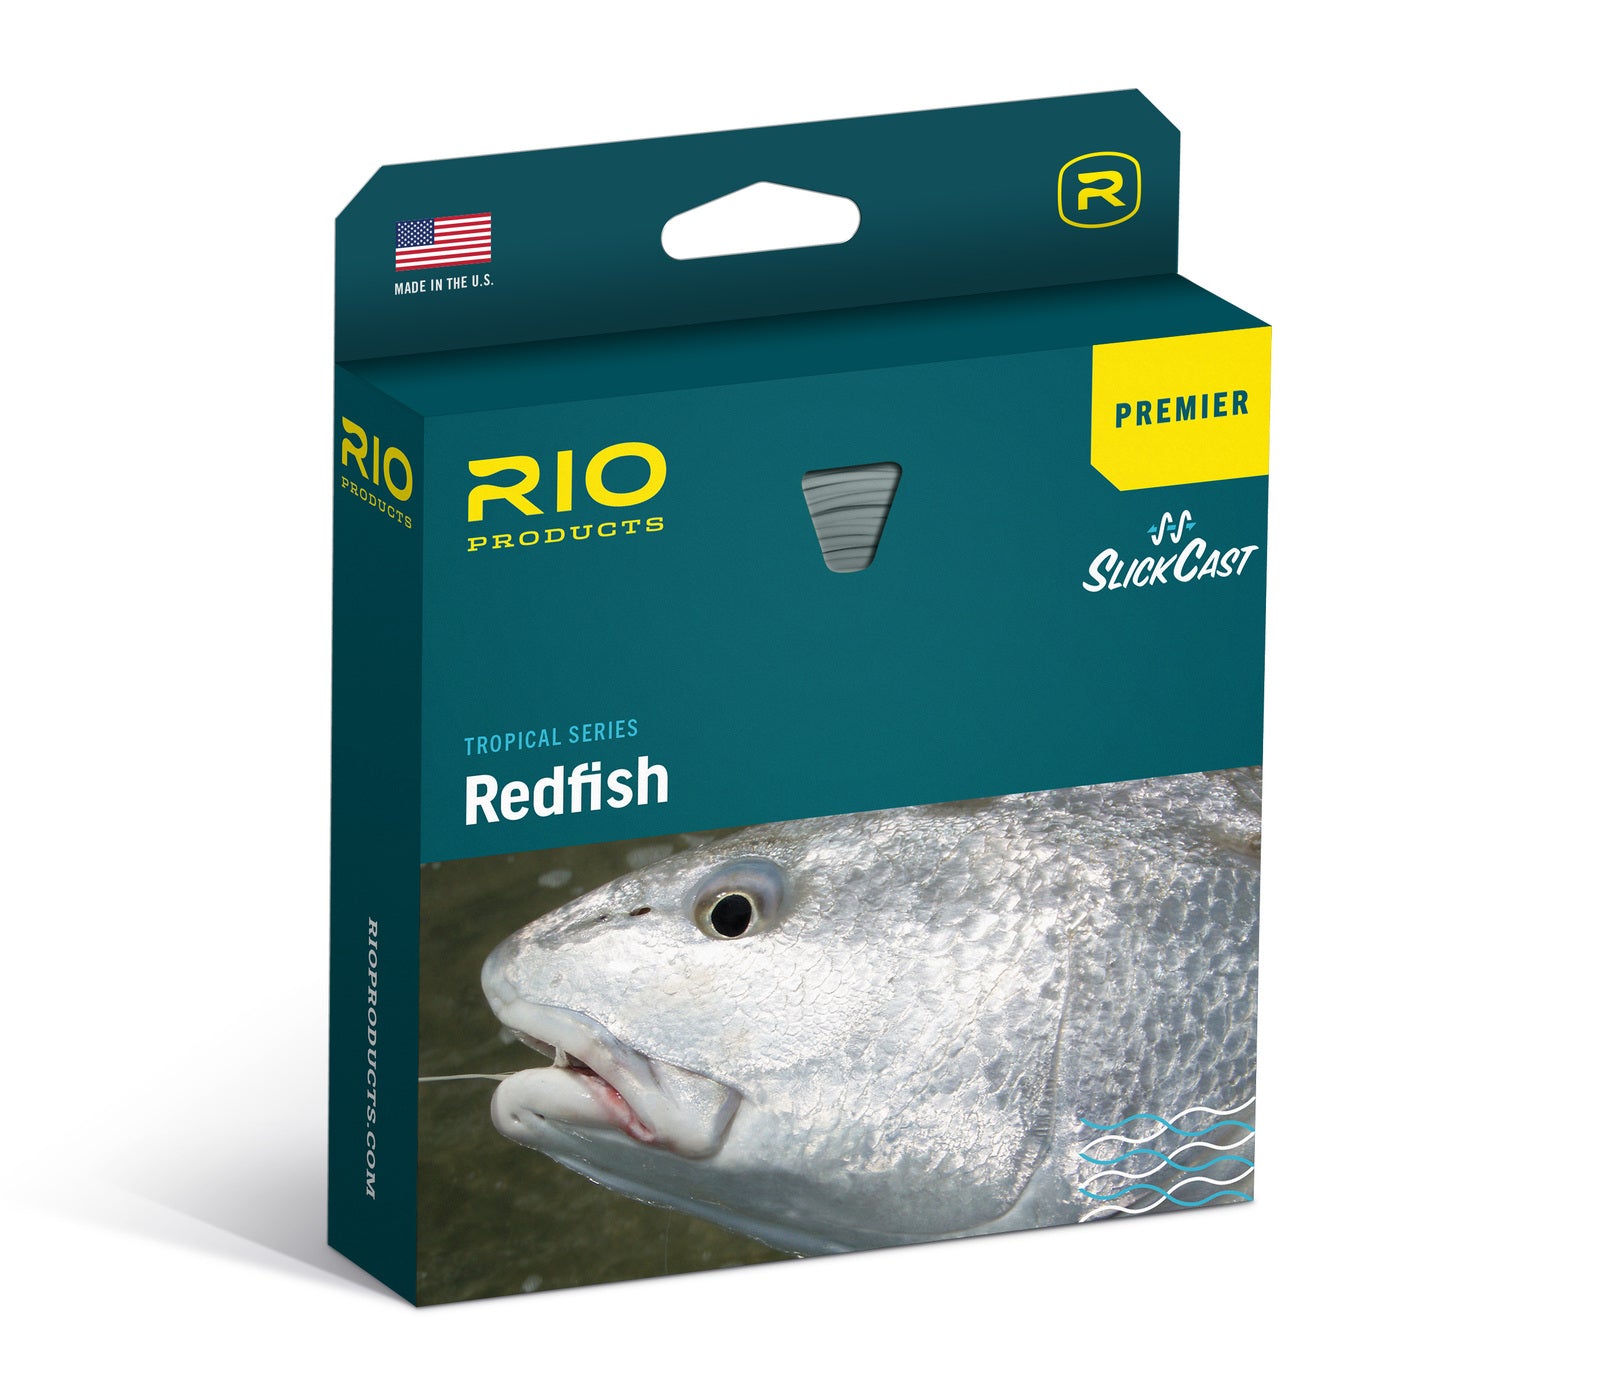 Rio General Purpose Saltwater Fly Line - The Fly Shack Fly Fishing